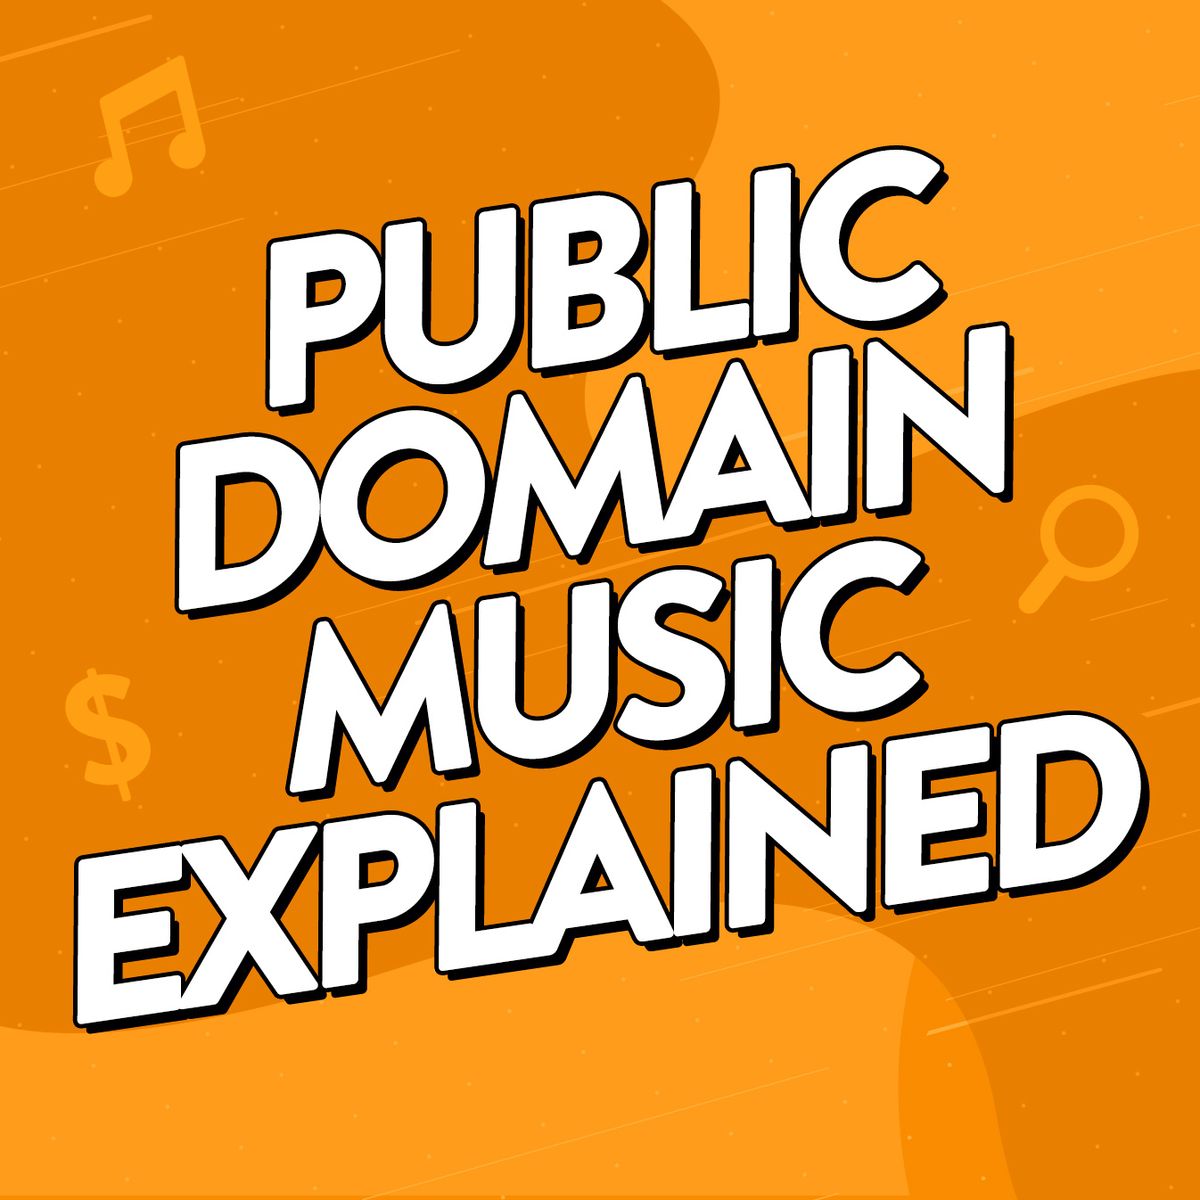 Image to accompany article explaining what public domain music is and where creators can download public domain music for 